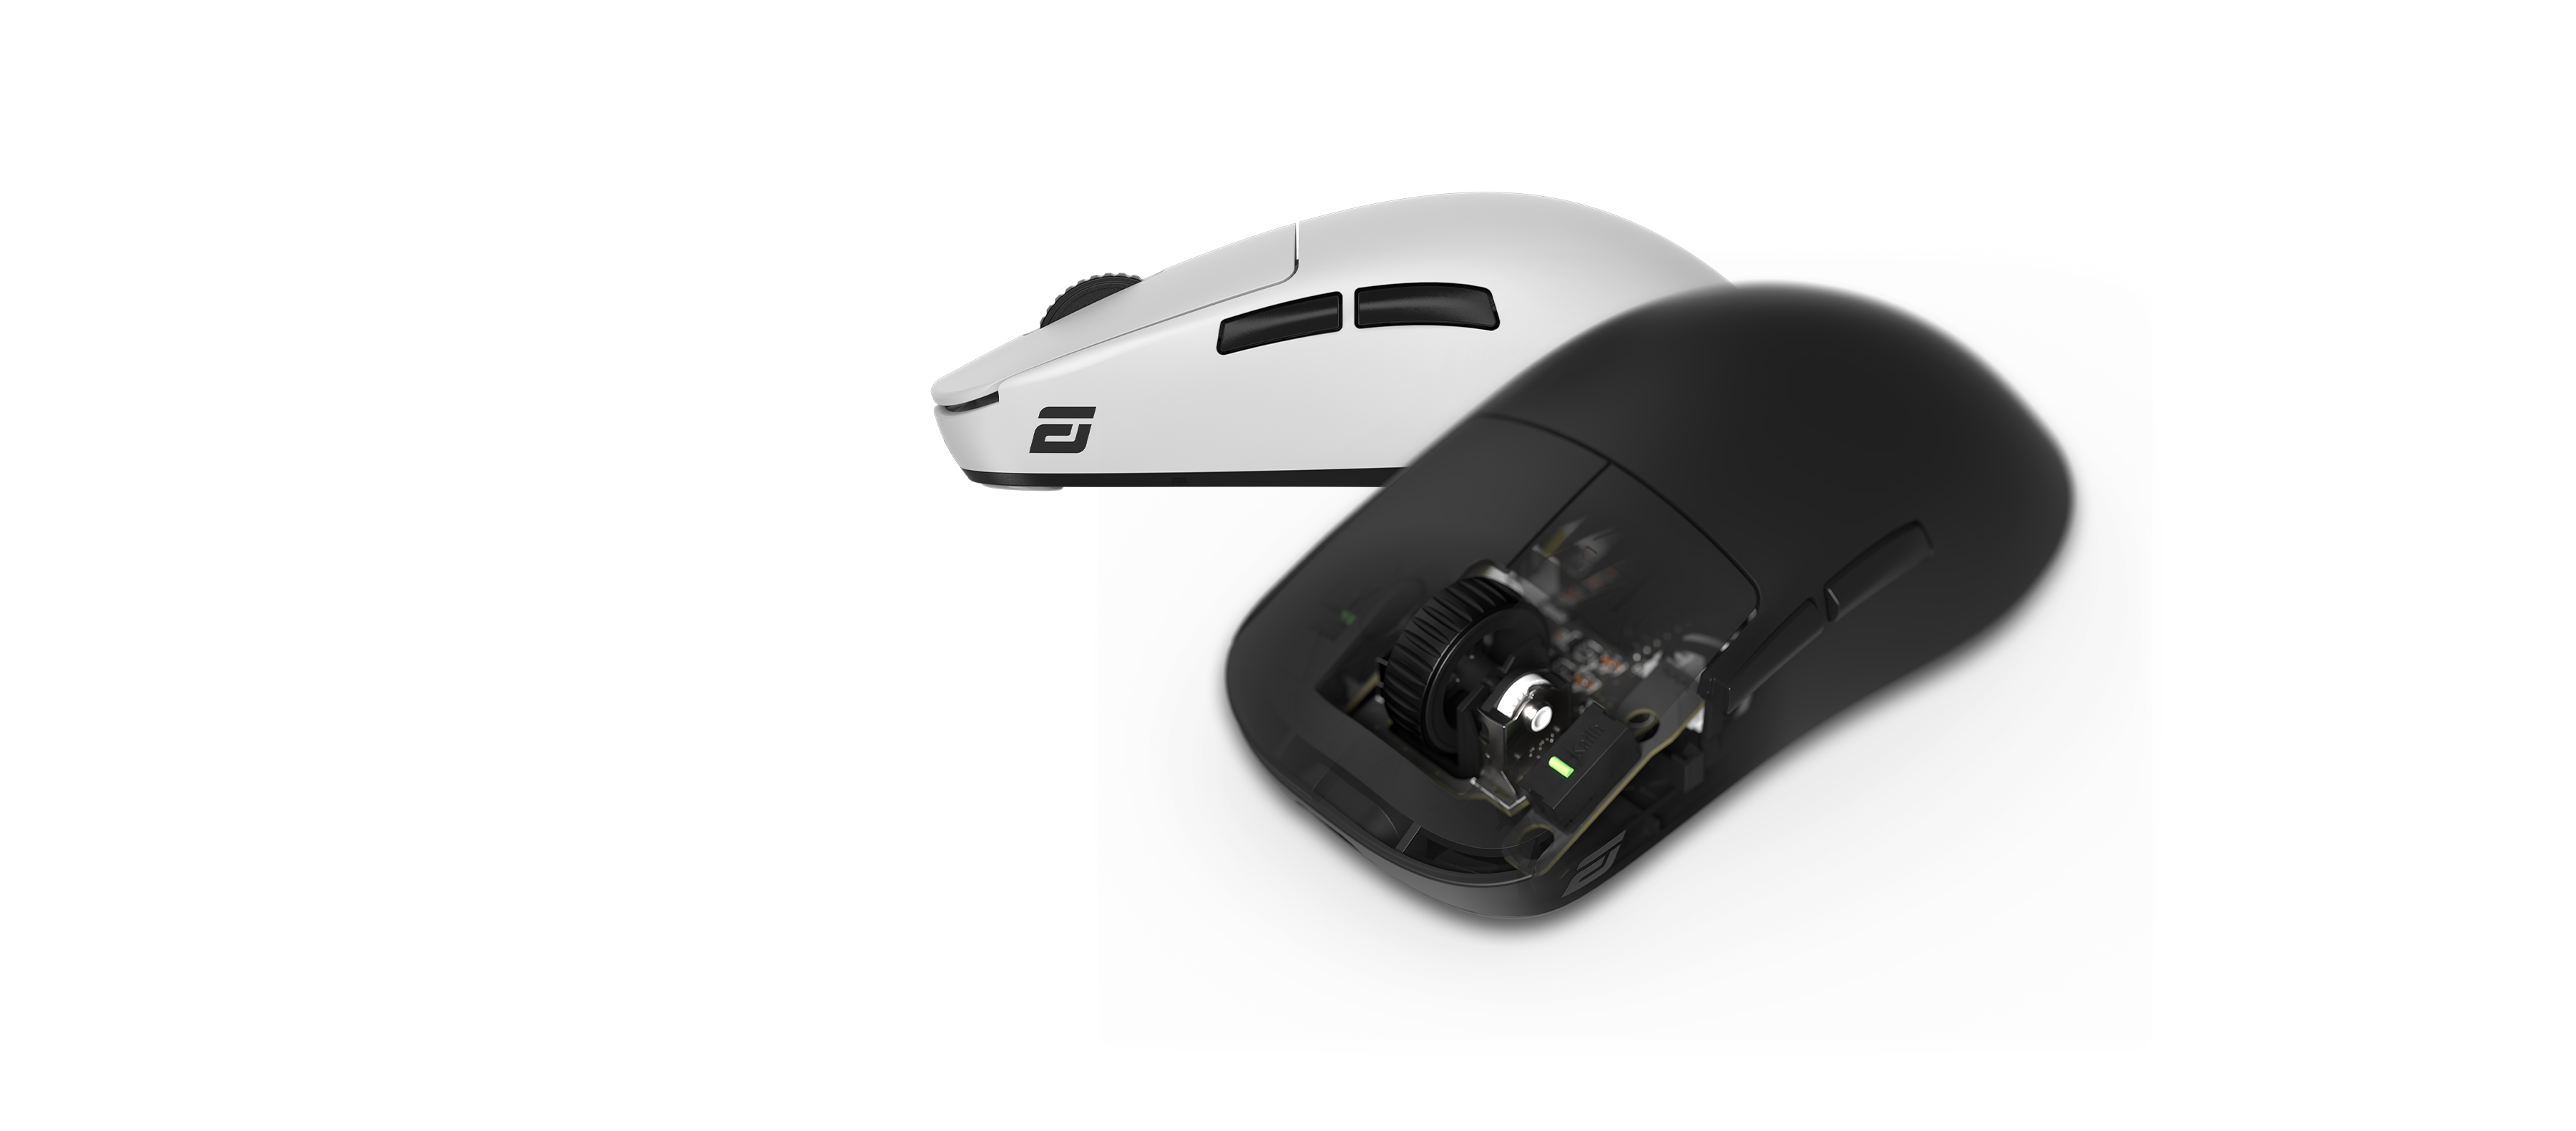 Wireless Gaming Mouse OP1we in Black or White